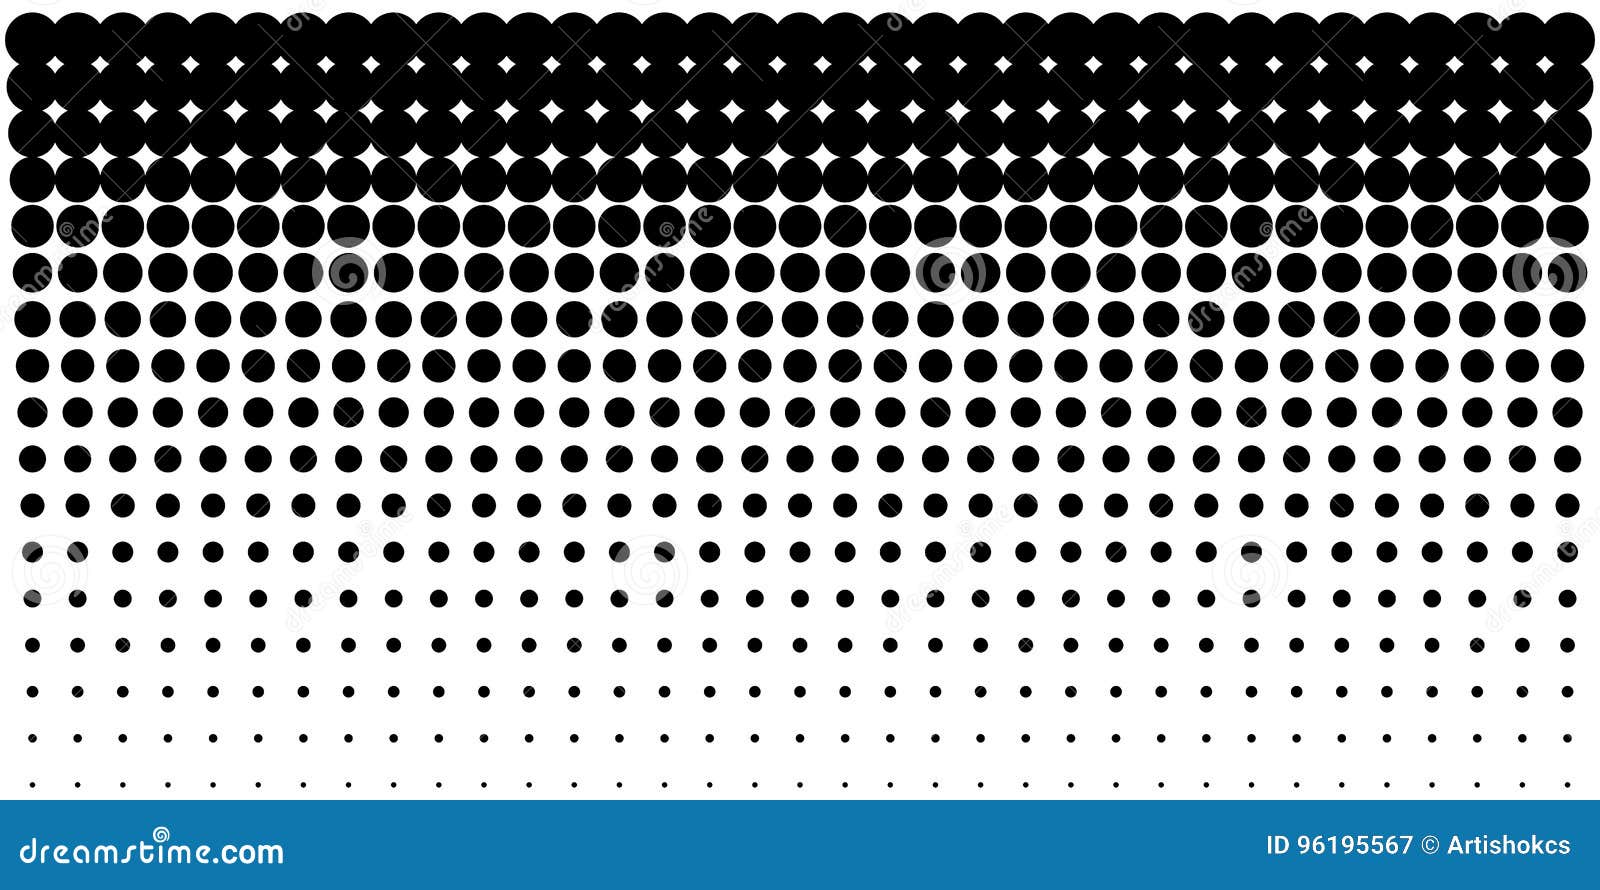 gradient halftone dots background, horizontal template using halftone dots pattern.  